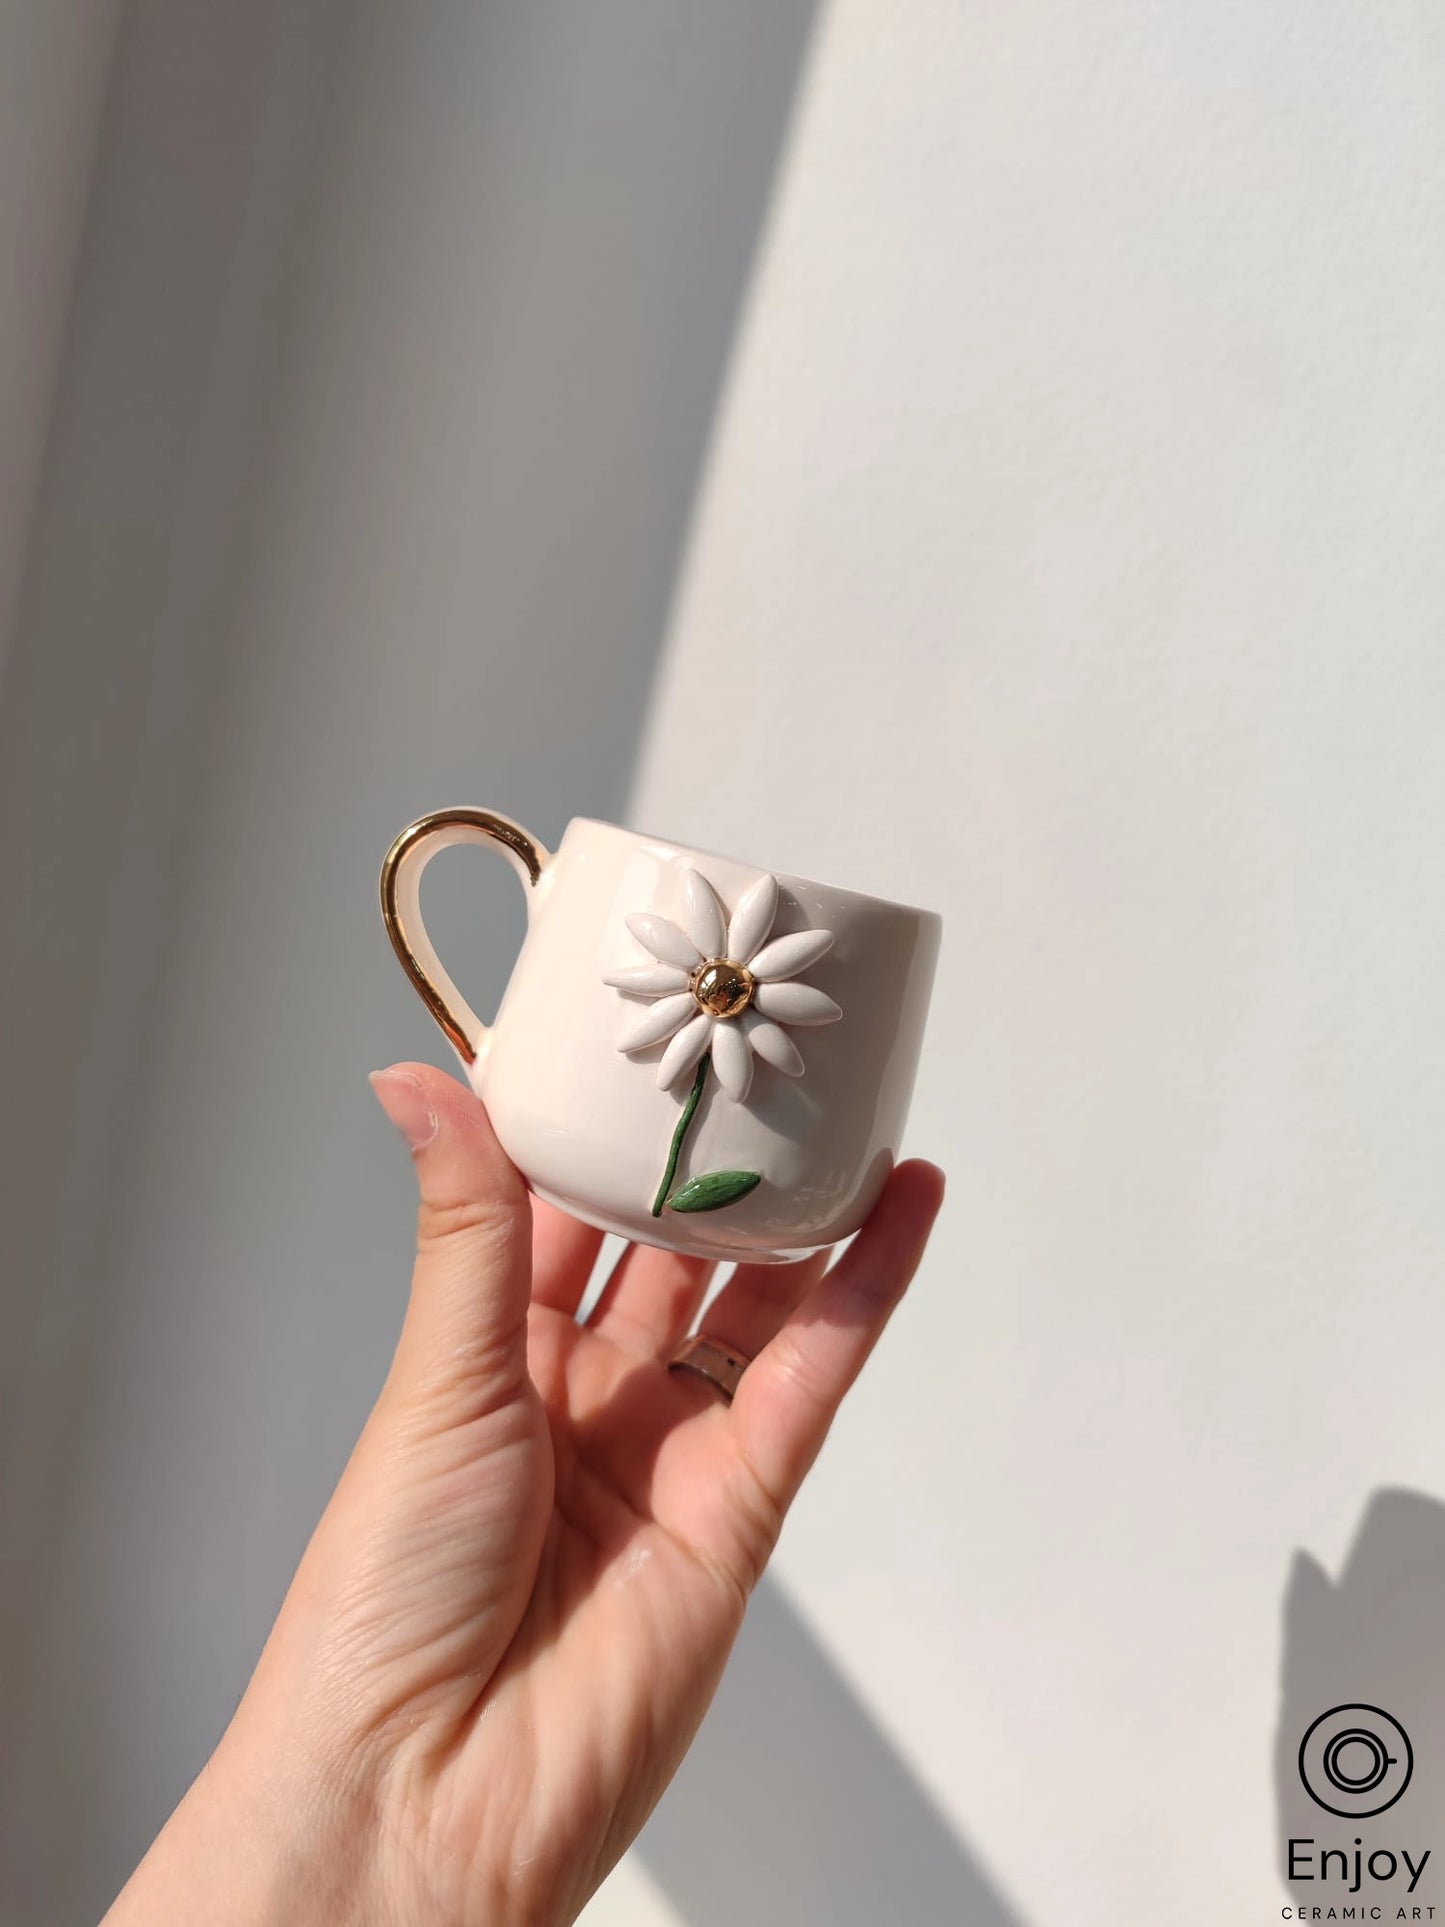 A delicate daisy-adorned mug with a gold handle, held in a hand against a shadow-cast wall.